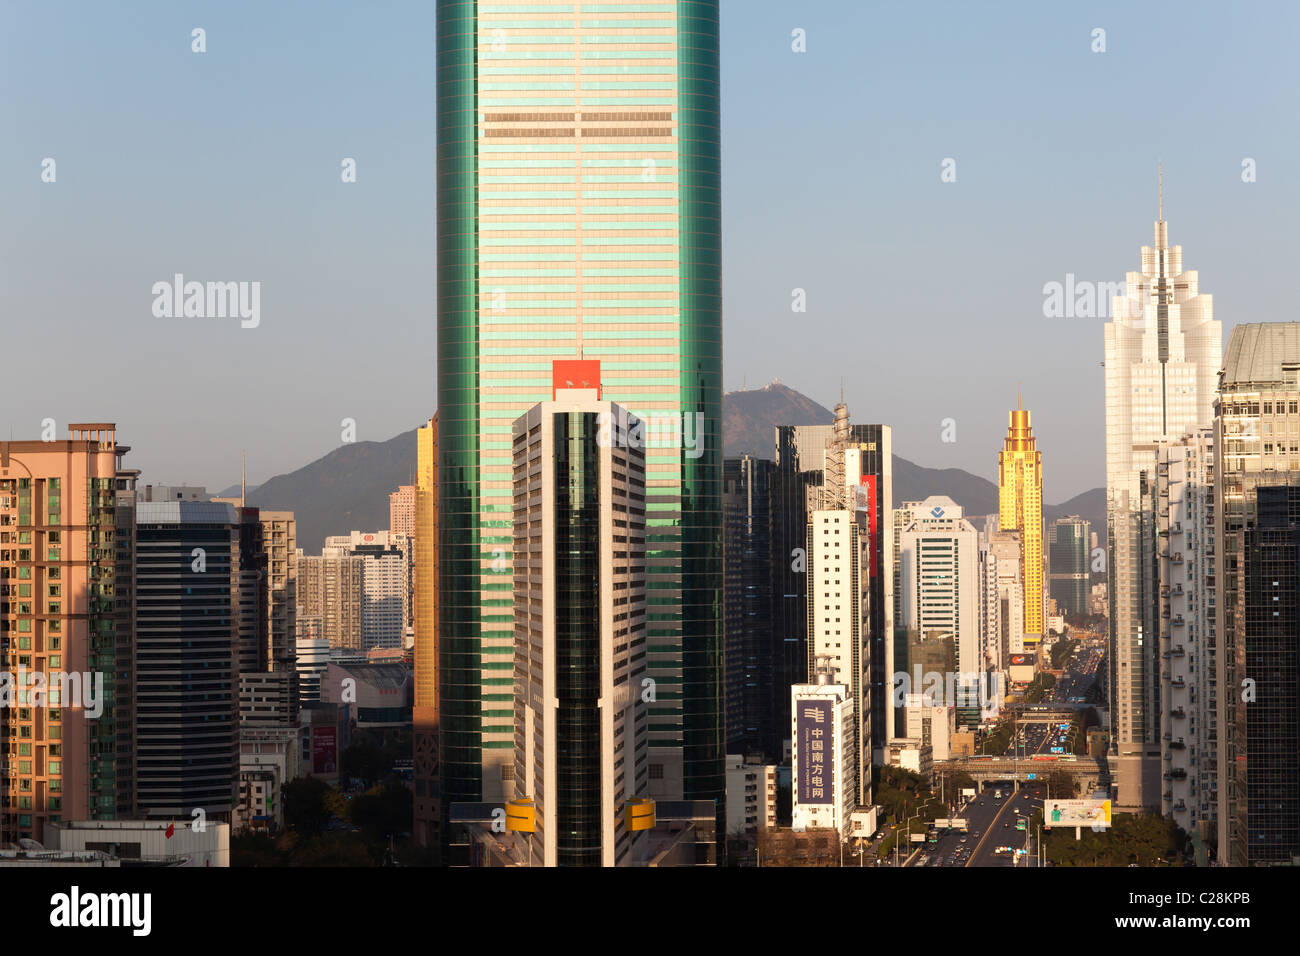 Skyscrapers in Shenzhen city in South China Stock Photo